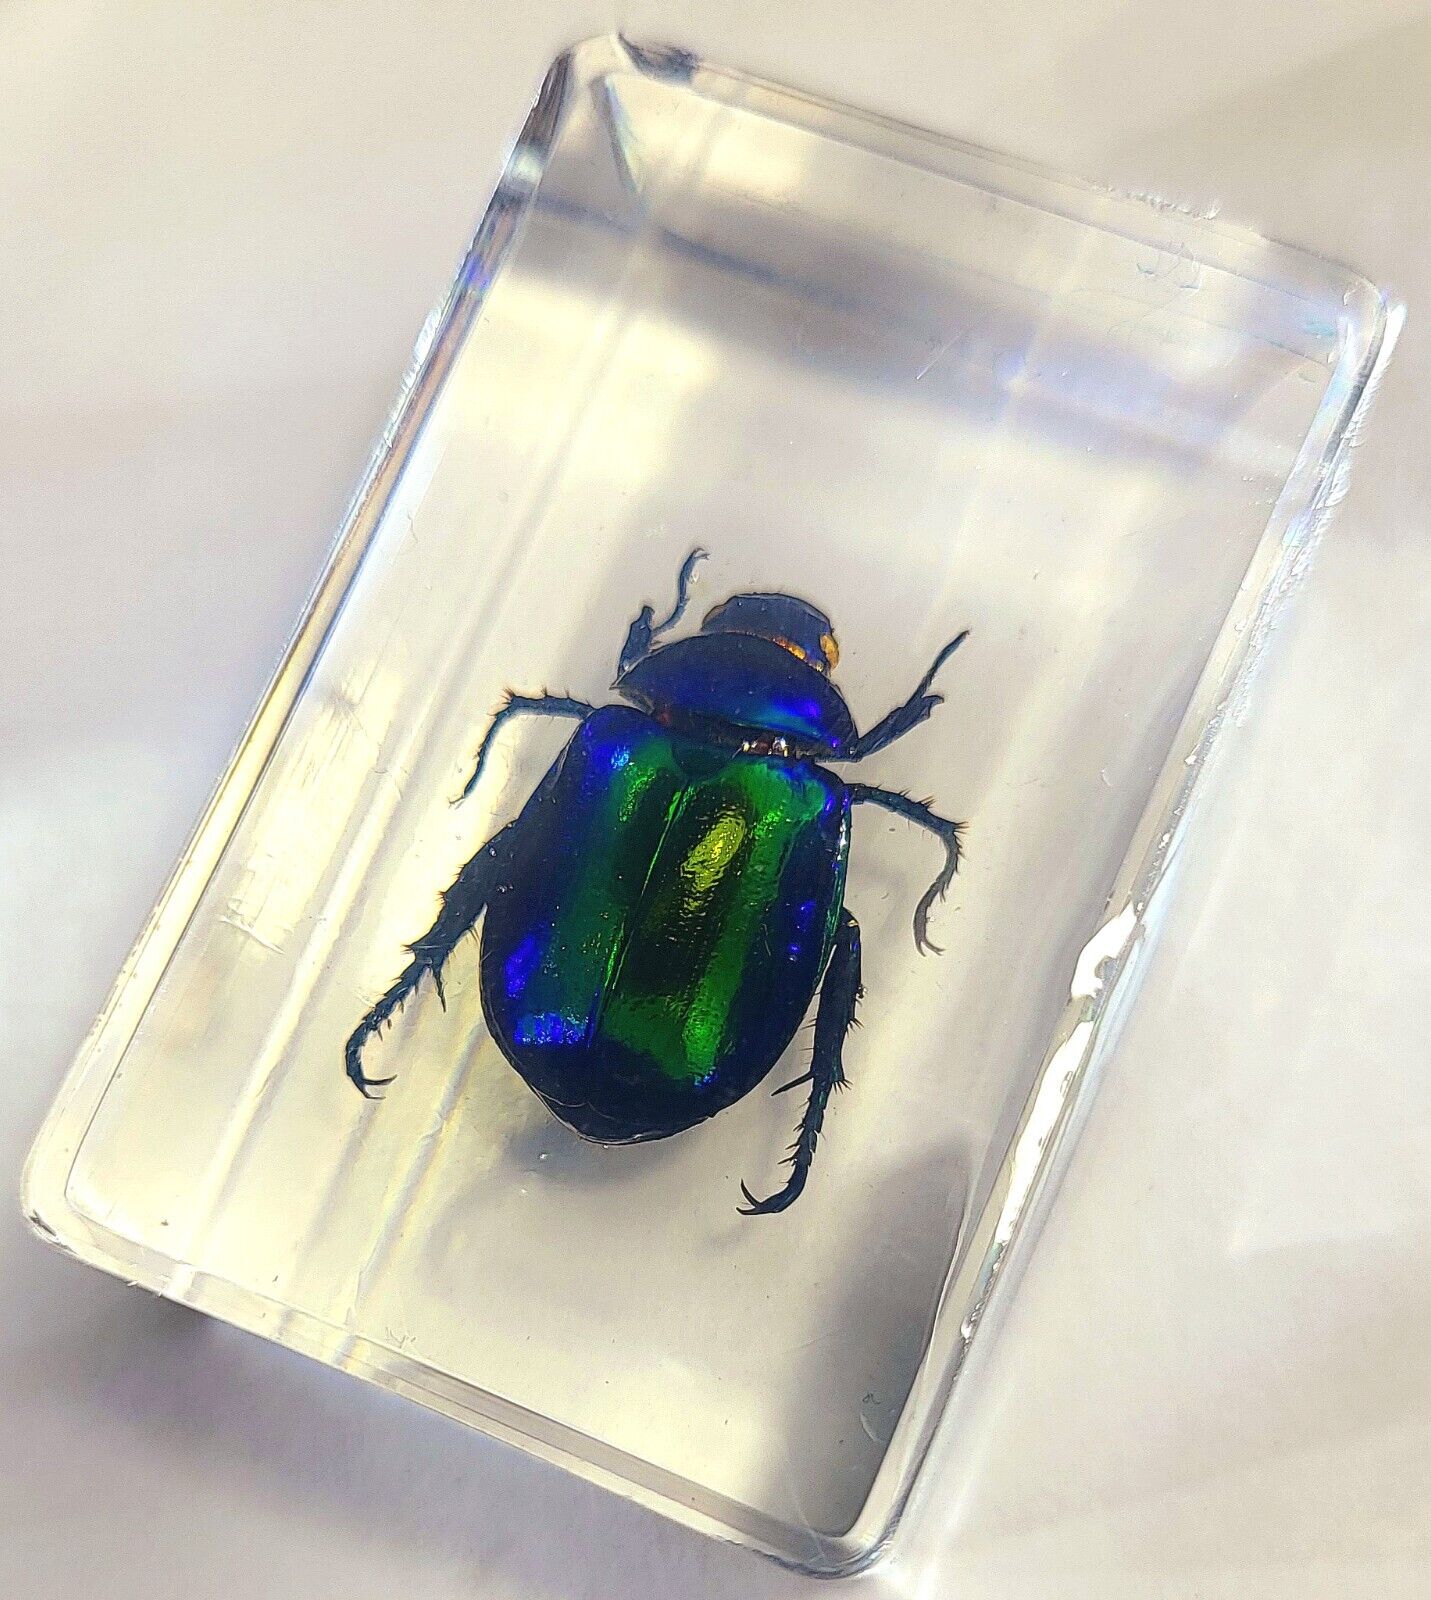 44mm Real Colorful Scarab Beetle in Clear Lucite Science Education Specimen